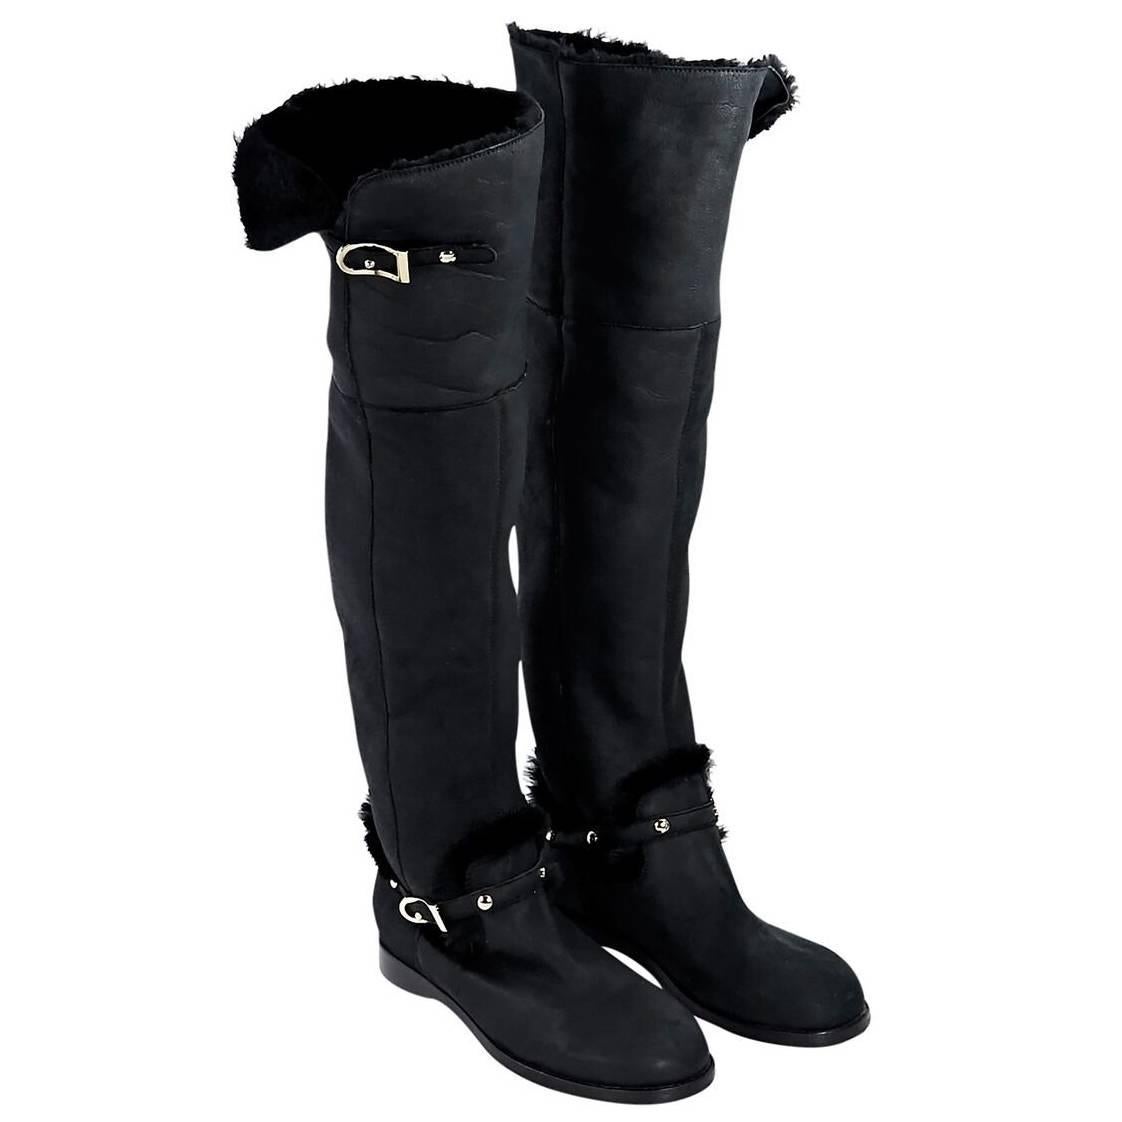 Black Jimmy Choo Shearling Over-The-Knee Boots